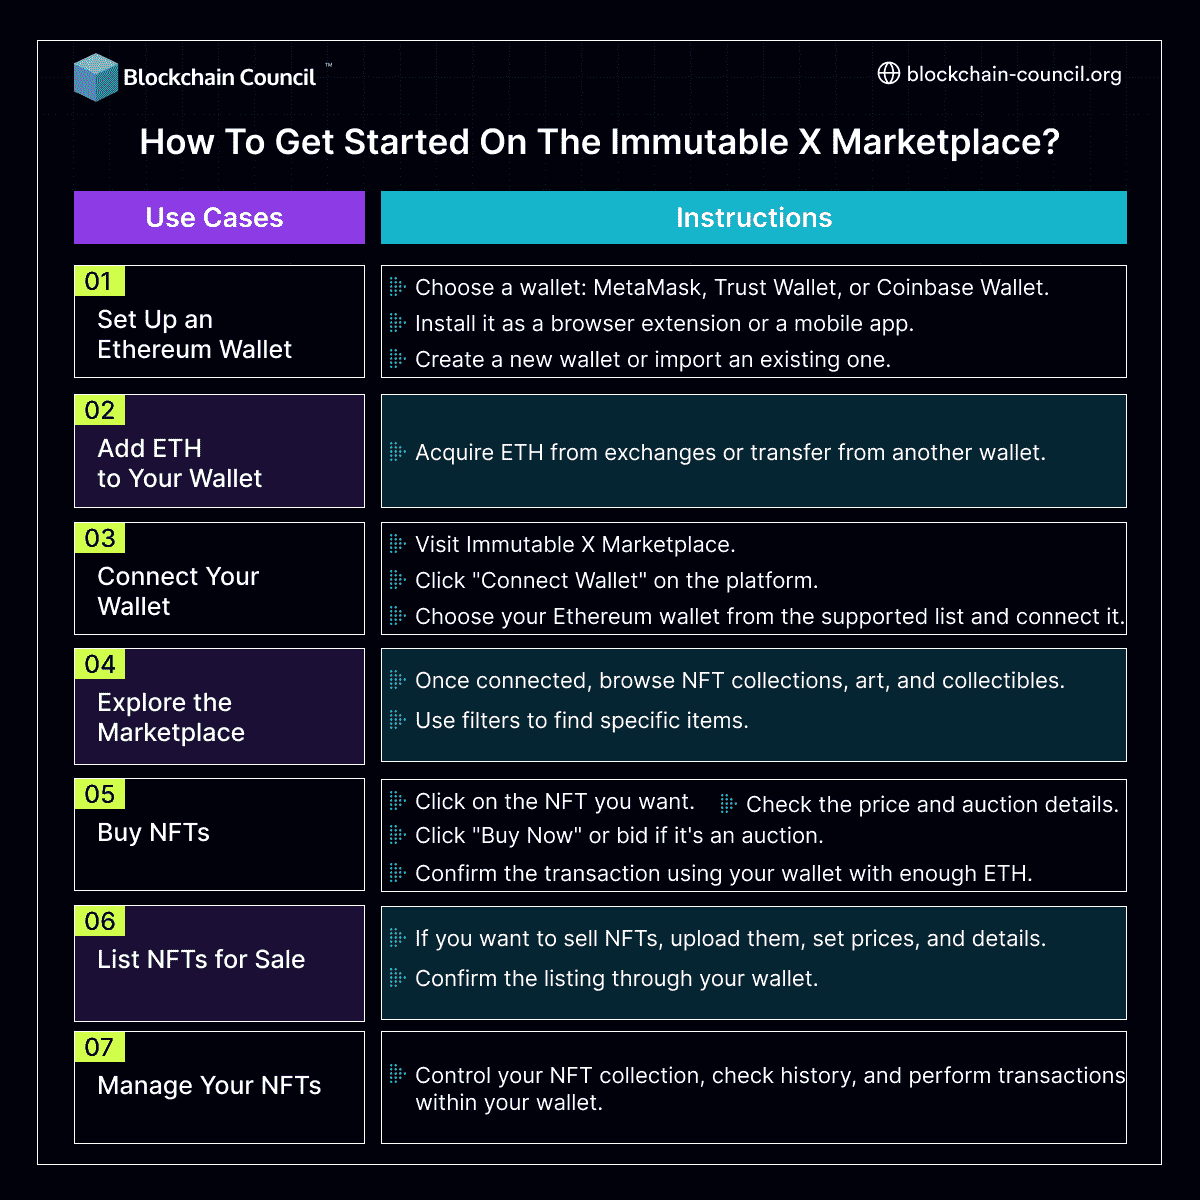 How to Get Started on the Immutable X Marketplace?